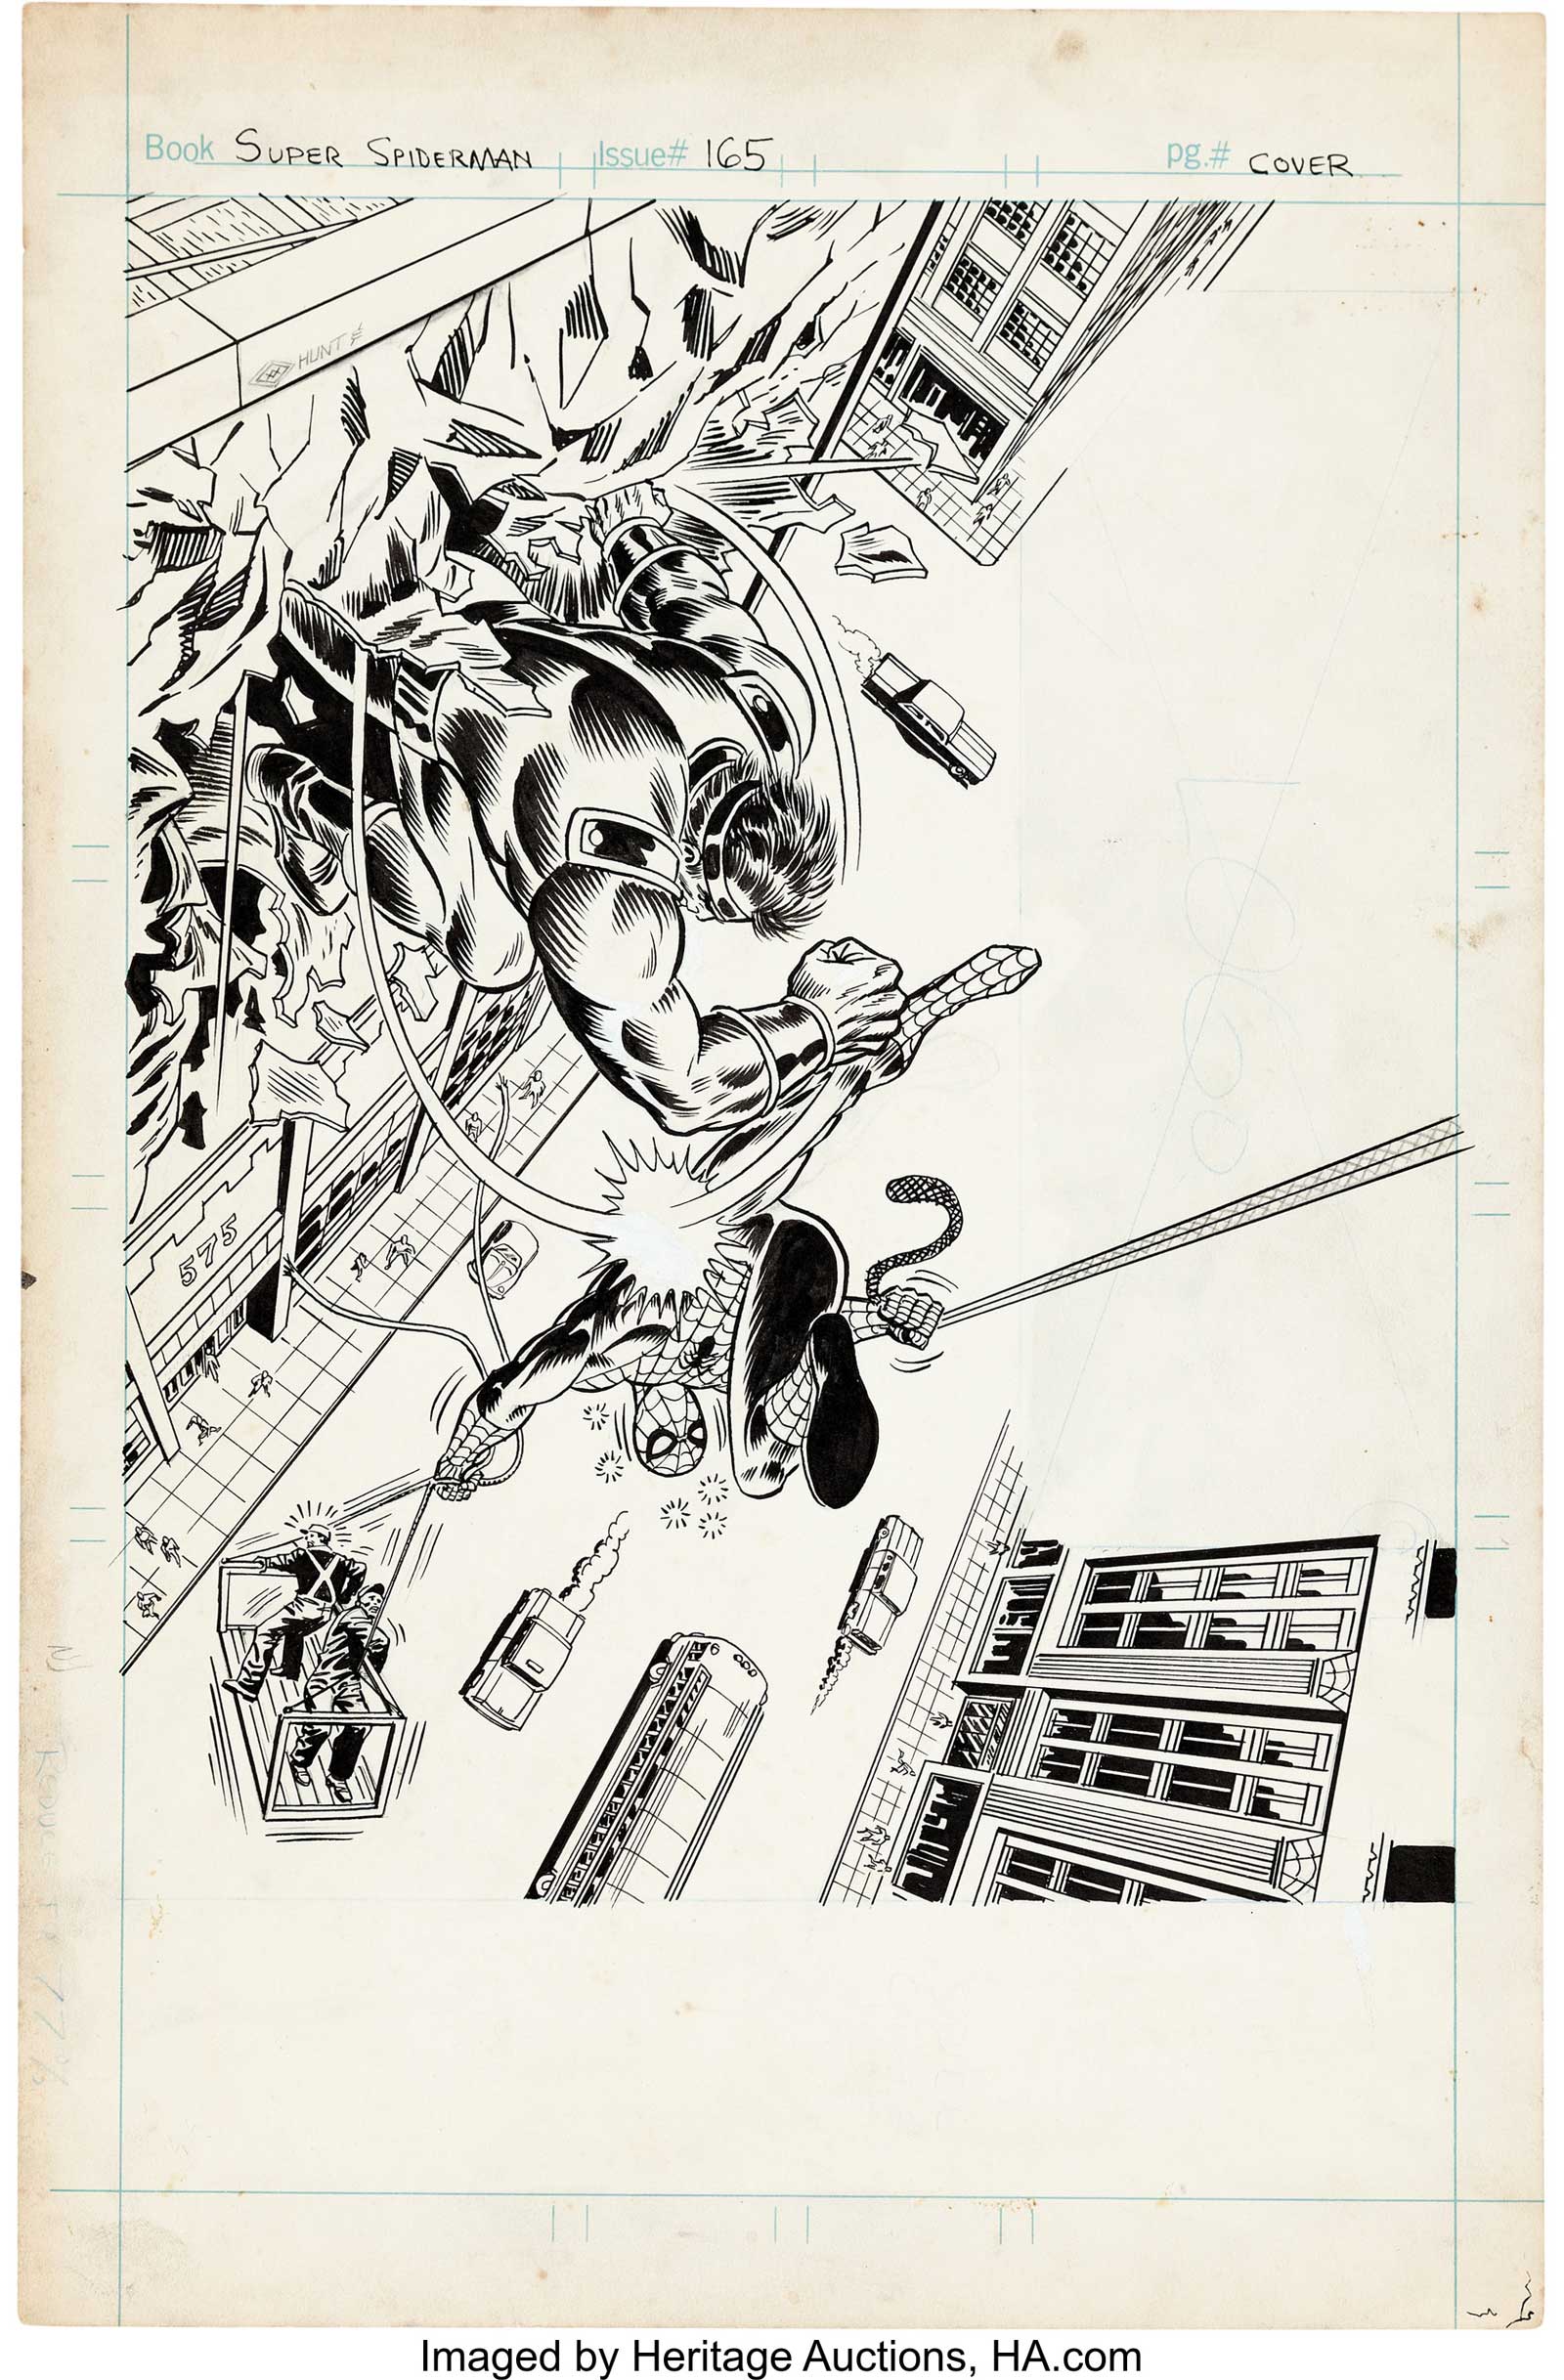 Dave Hunt and Frank Giacoia Super Spider-Man #165 Cover Original Art. A very spot-on redux of John Romita Sr.'s cover for Amazing Spider-Man #116, which this issue reprints in part. The story of the Smasher (the big guy on the cover) actually started as the story of the Man-Monster in Spectacular Spider-Man magazine #1. That story was reformatted, and his name was changed, to reprint in ASM issues #116-118. 